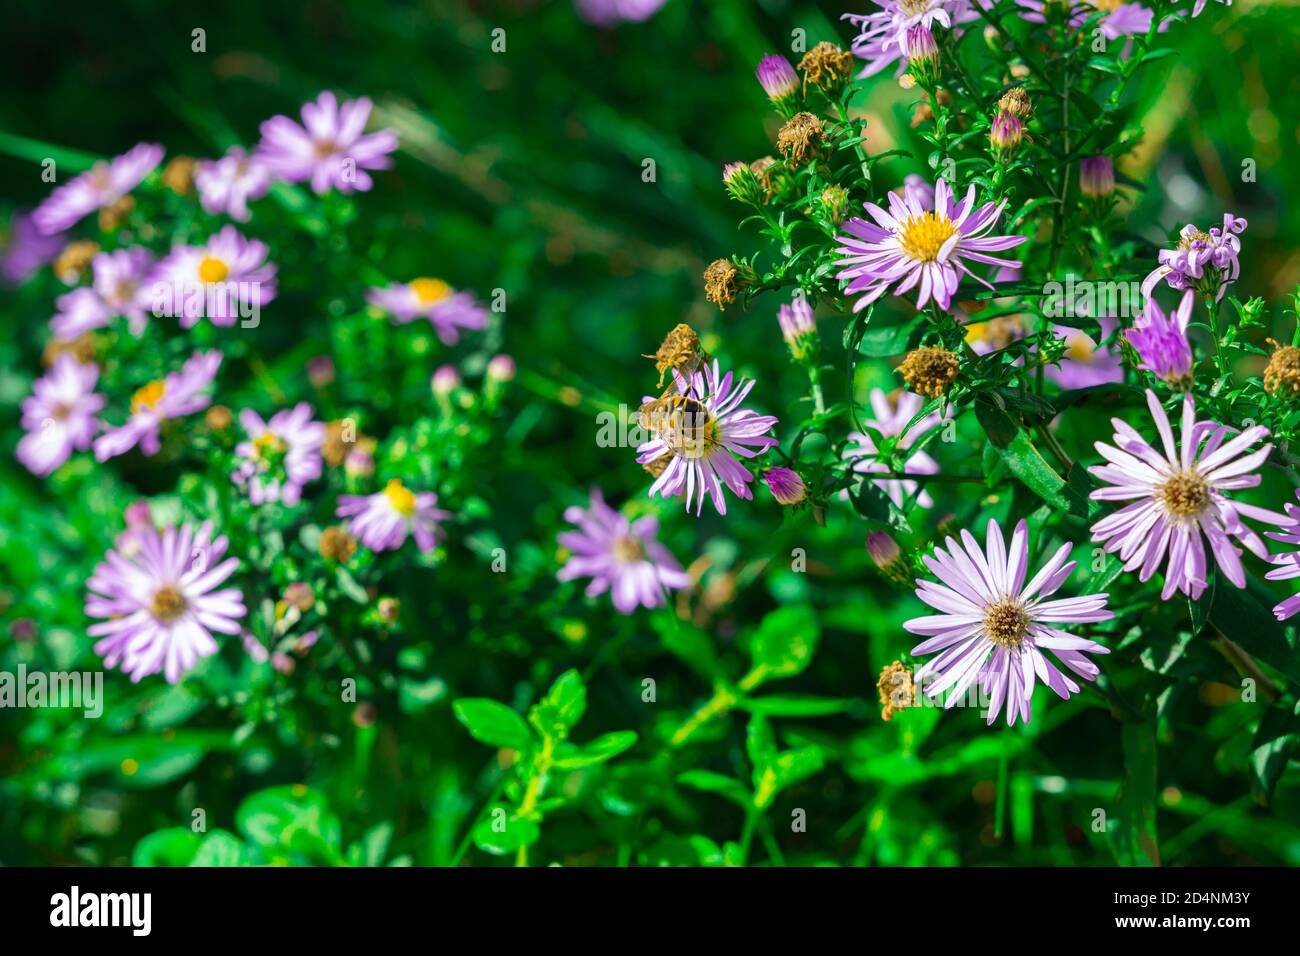 bees are pollinating some flowers Stock Photo